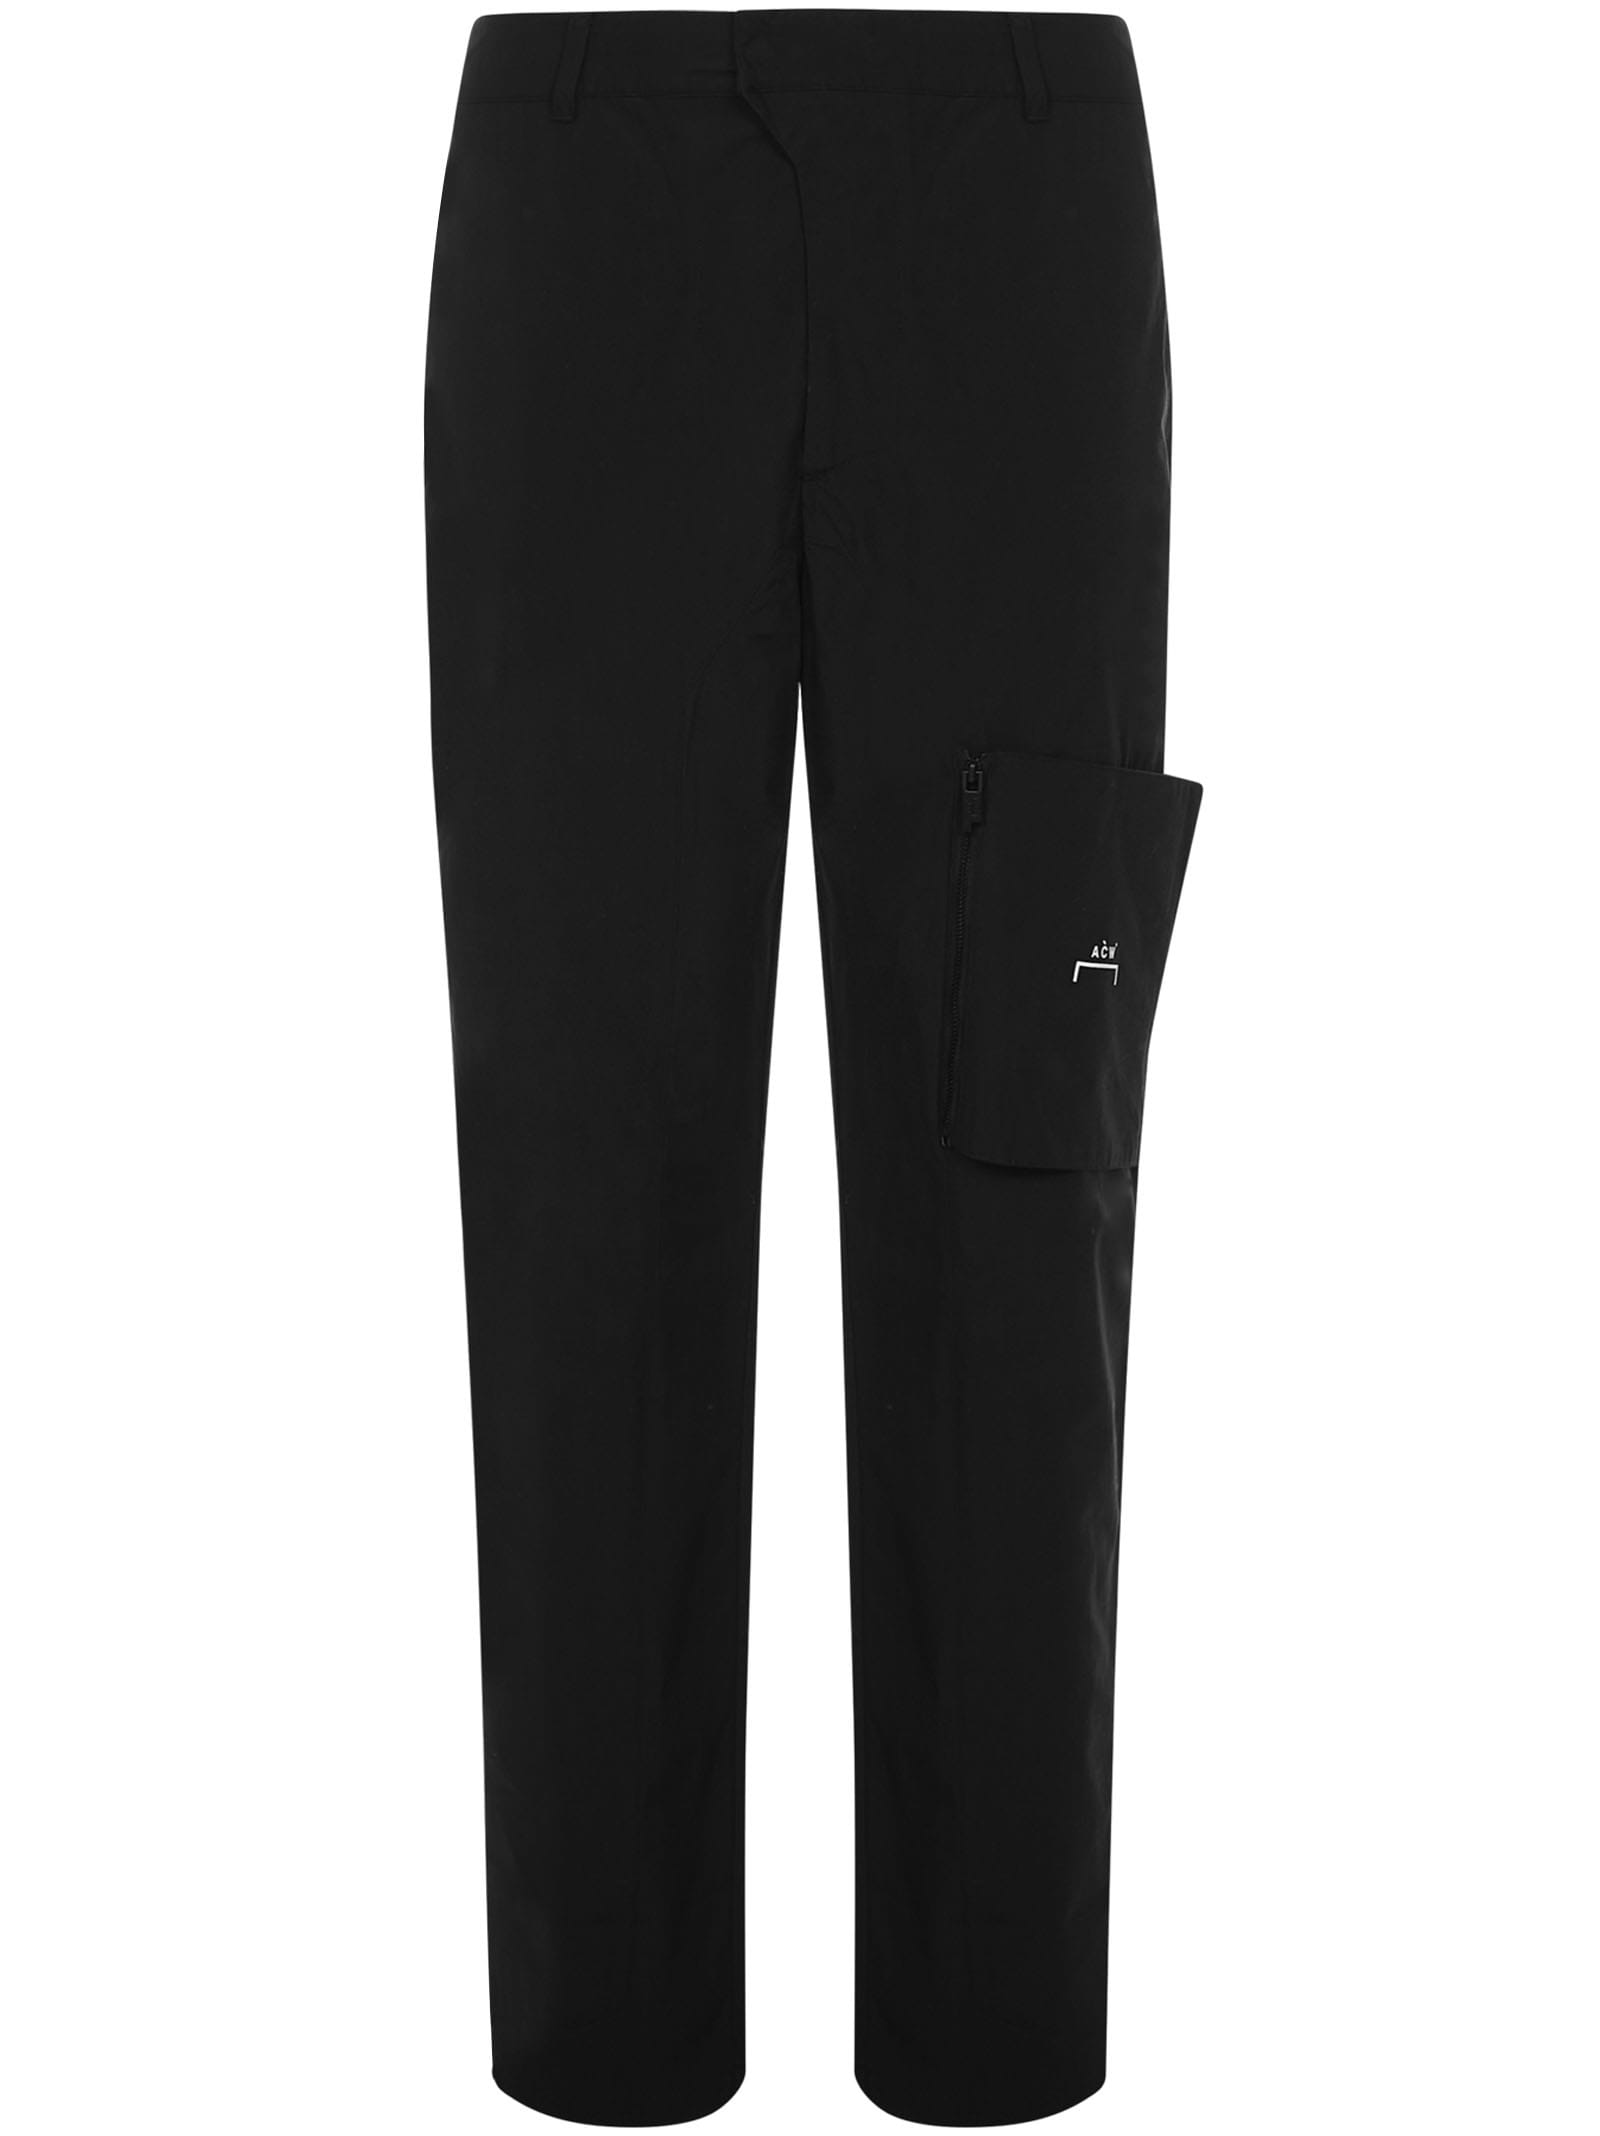 A-COLD-WALL A Cold Wall Circuit Trousers